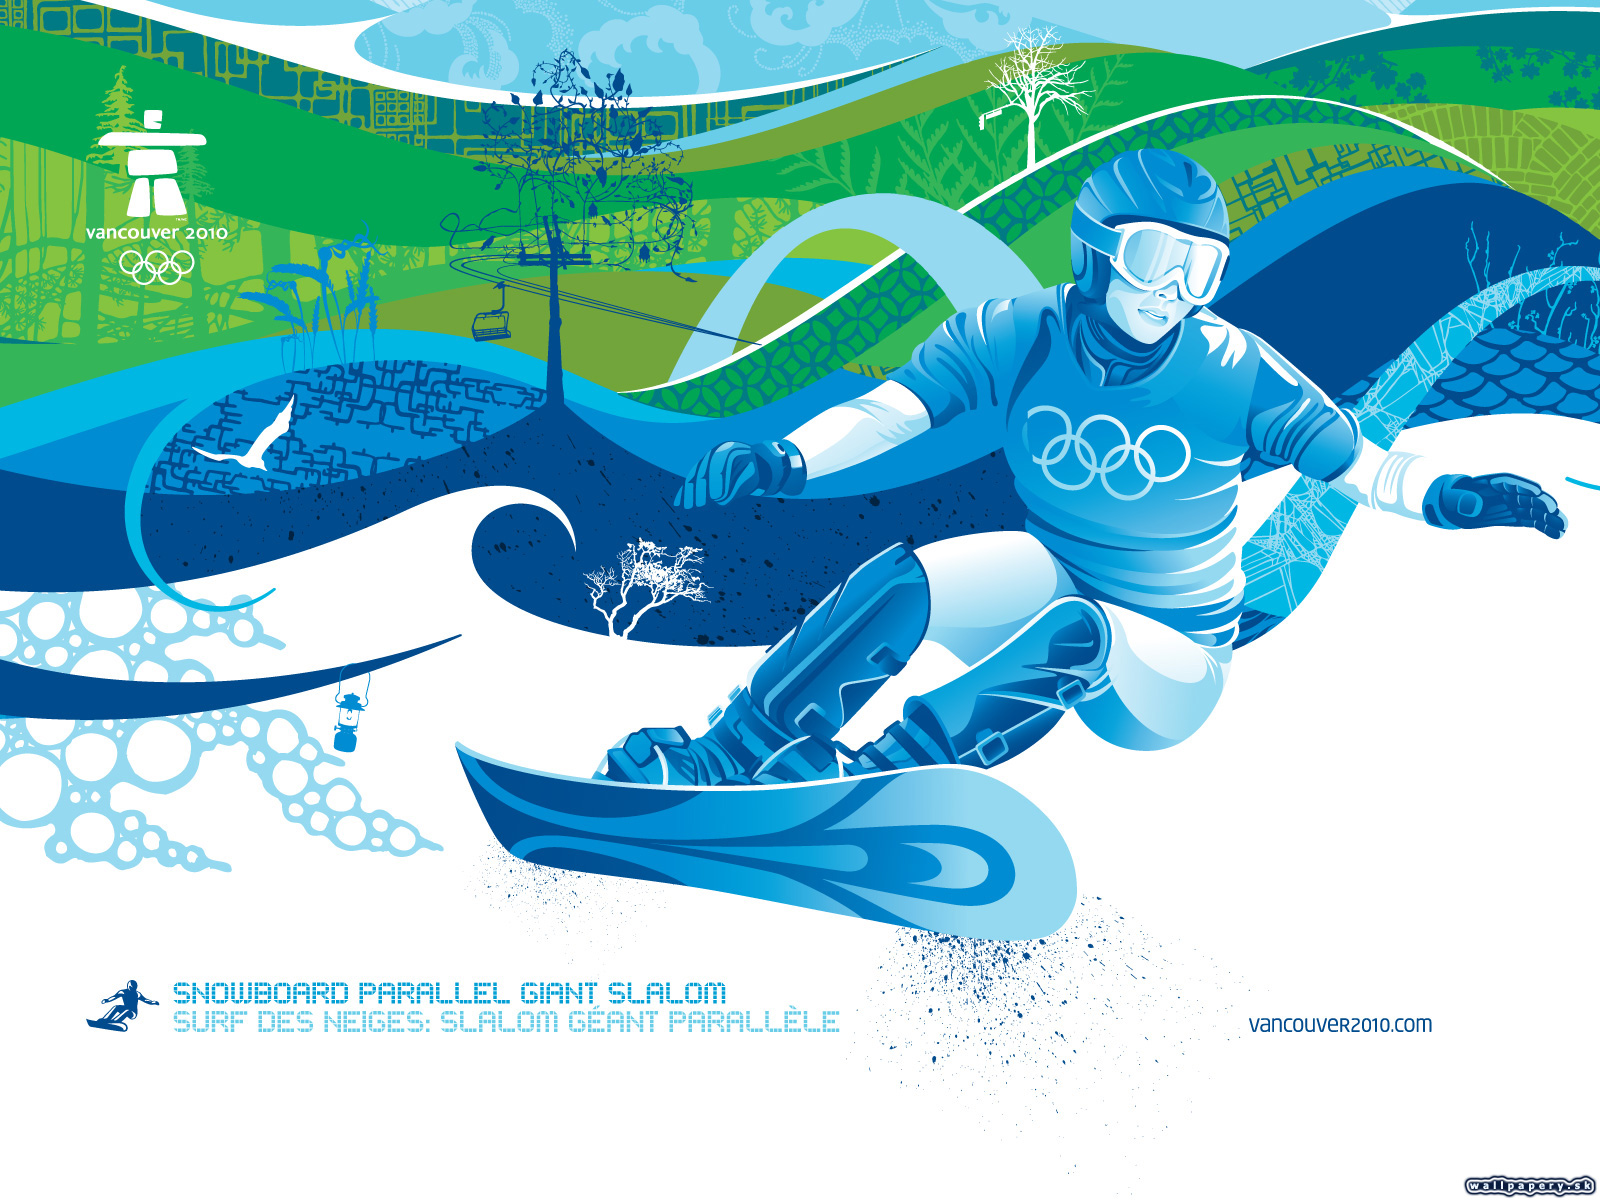 Vancouver 2010 - The Official Video Game of the Olympic Winter Games - wallpaper 7